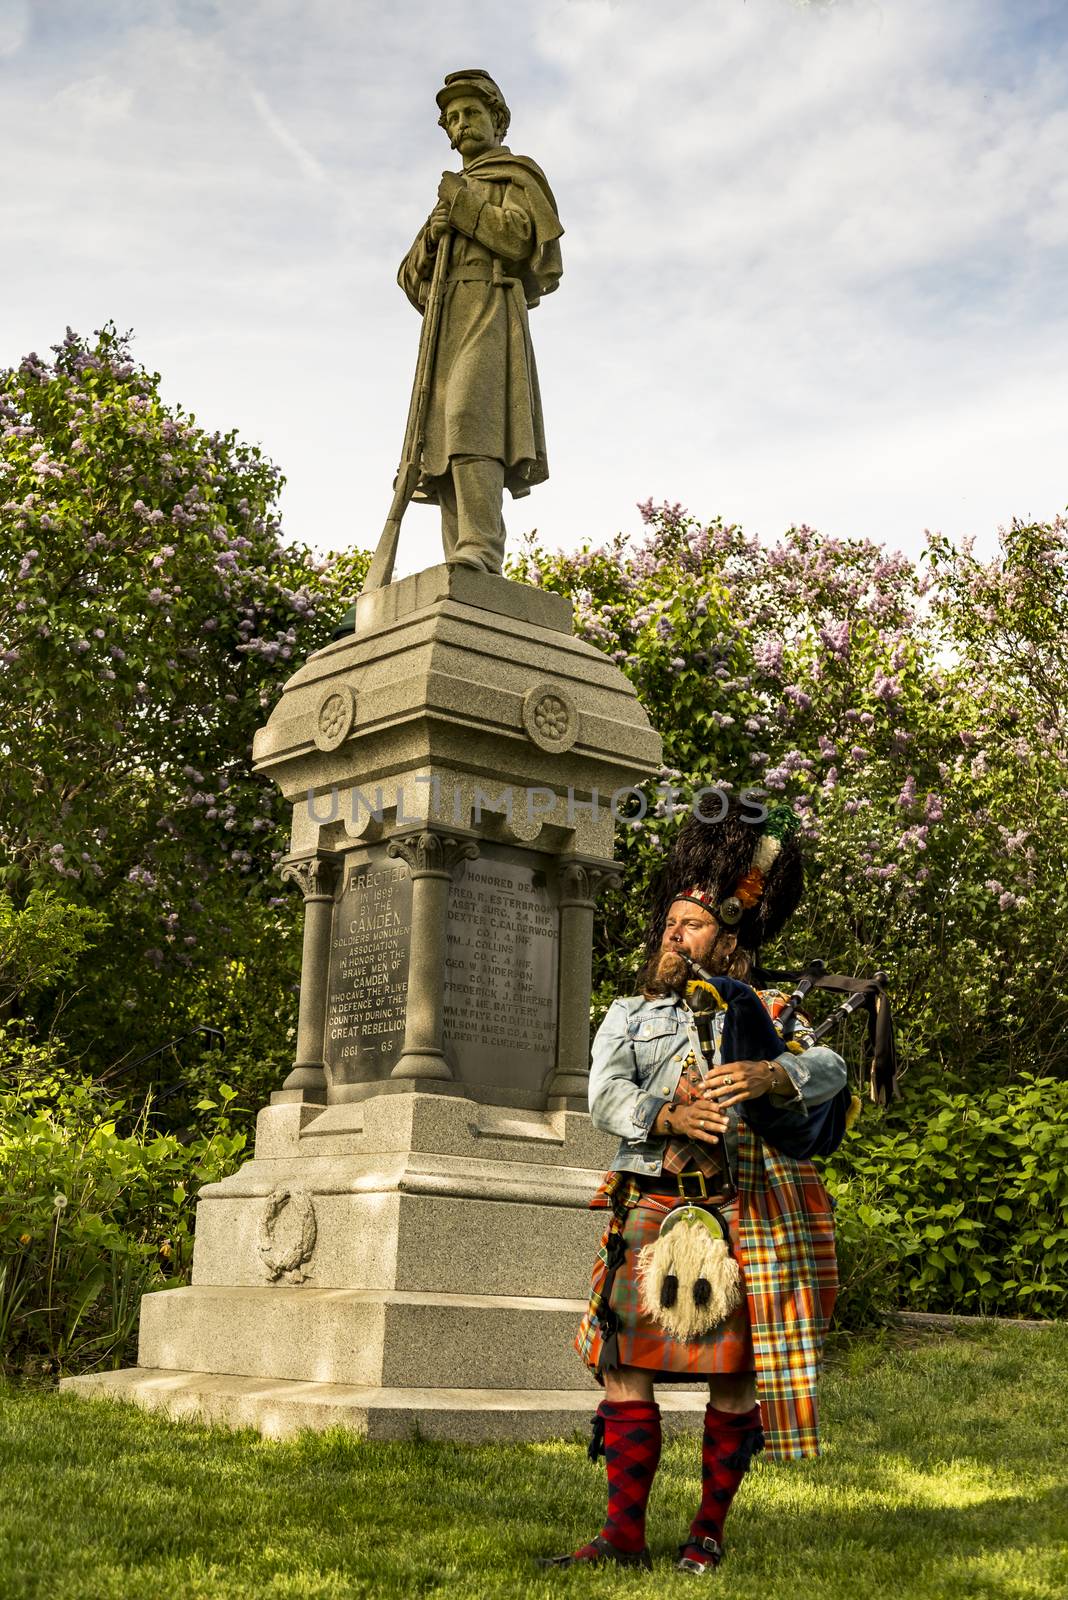 CAMDEN ME - MAY 28: Scottish bagpiper dressed in traditional red and black tartan dress under a American soldier statue on May 28, 2016 in Camden ME, USA